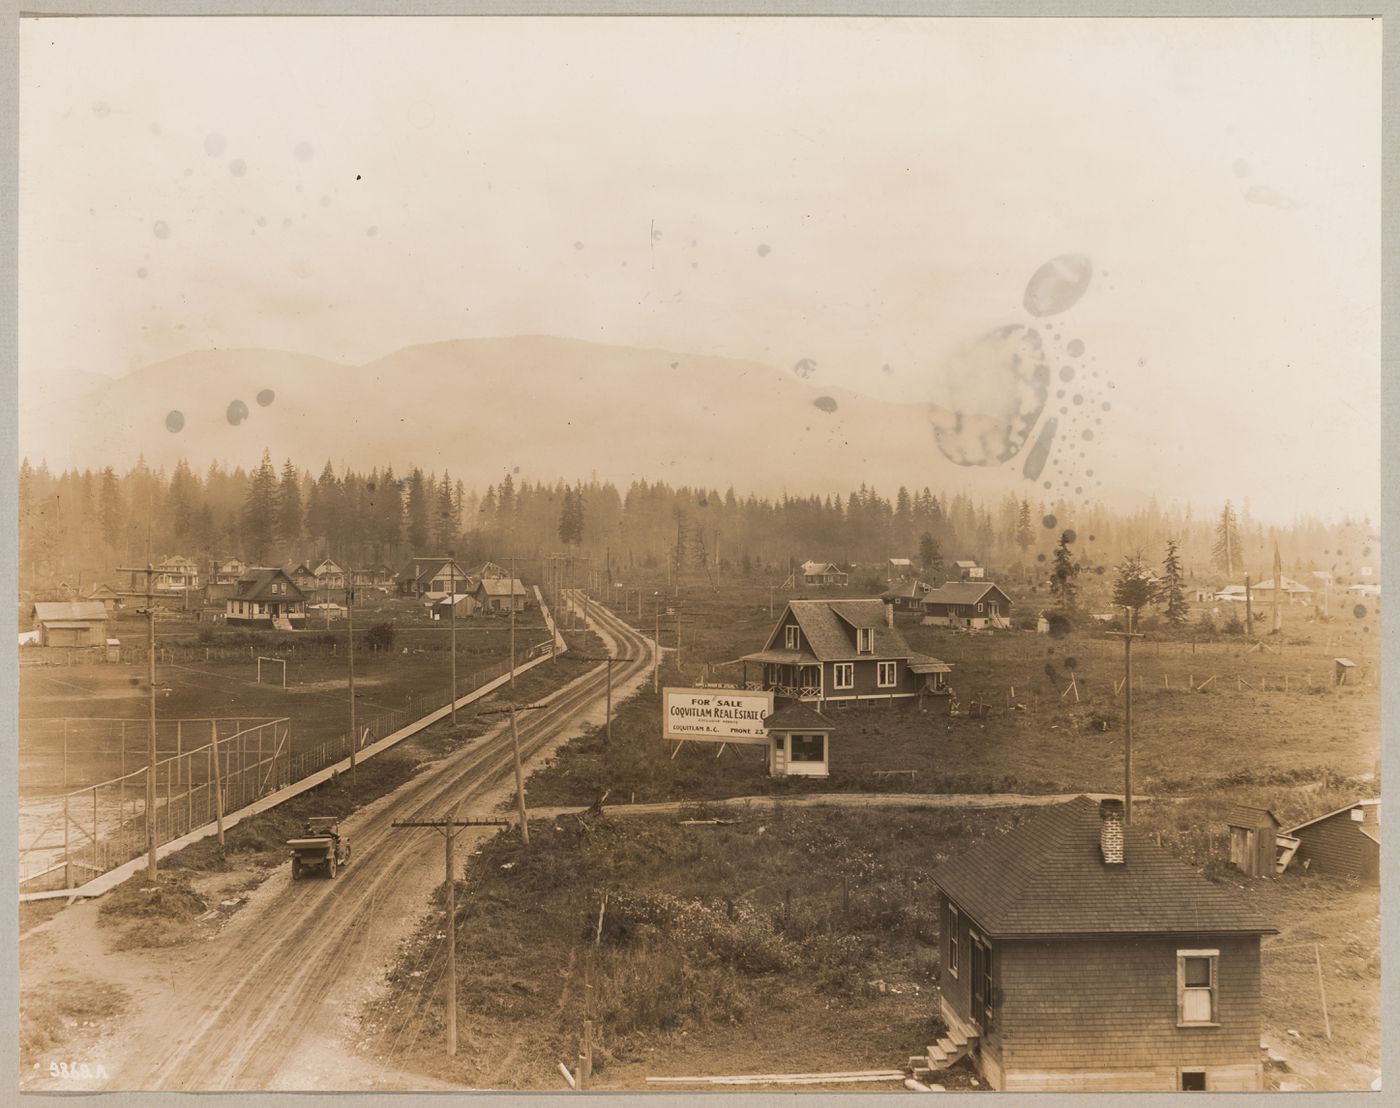 View of houses with athletic fields on the left, Coquitlam (now Port Coquitlam), British Columbia